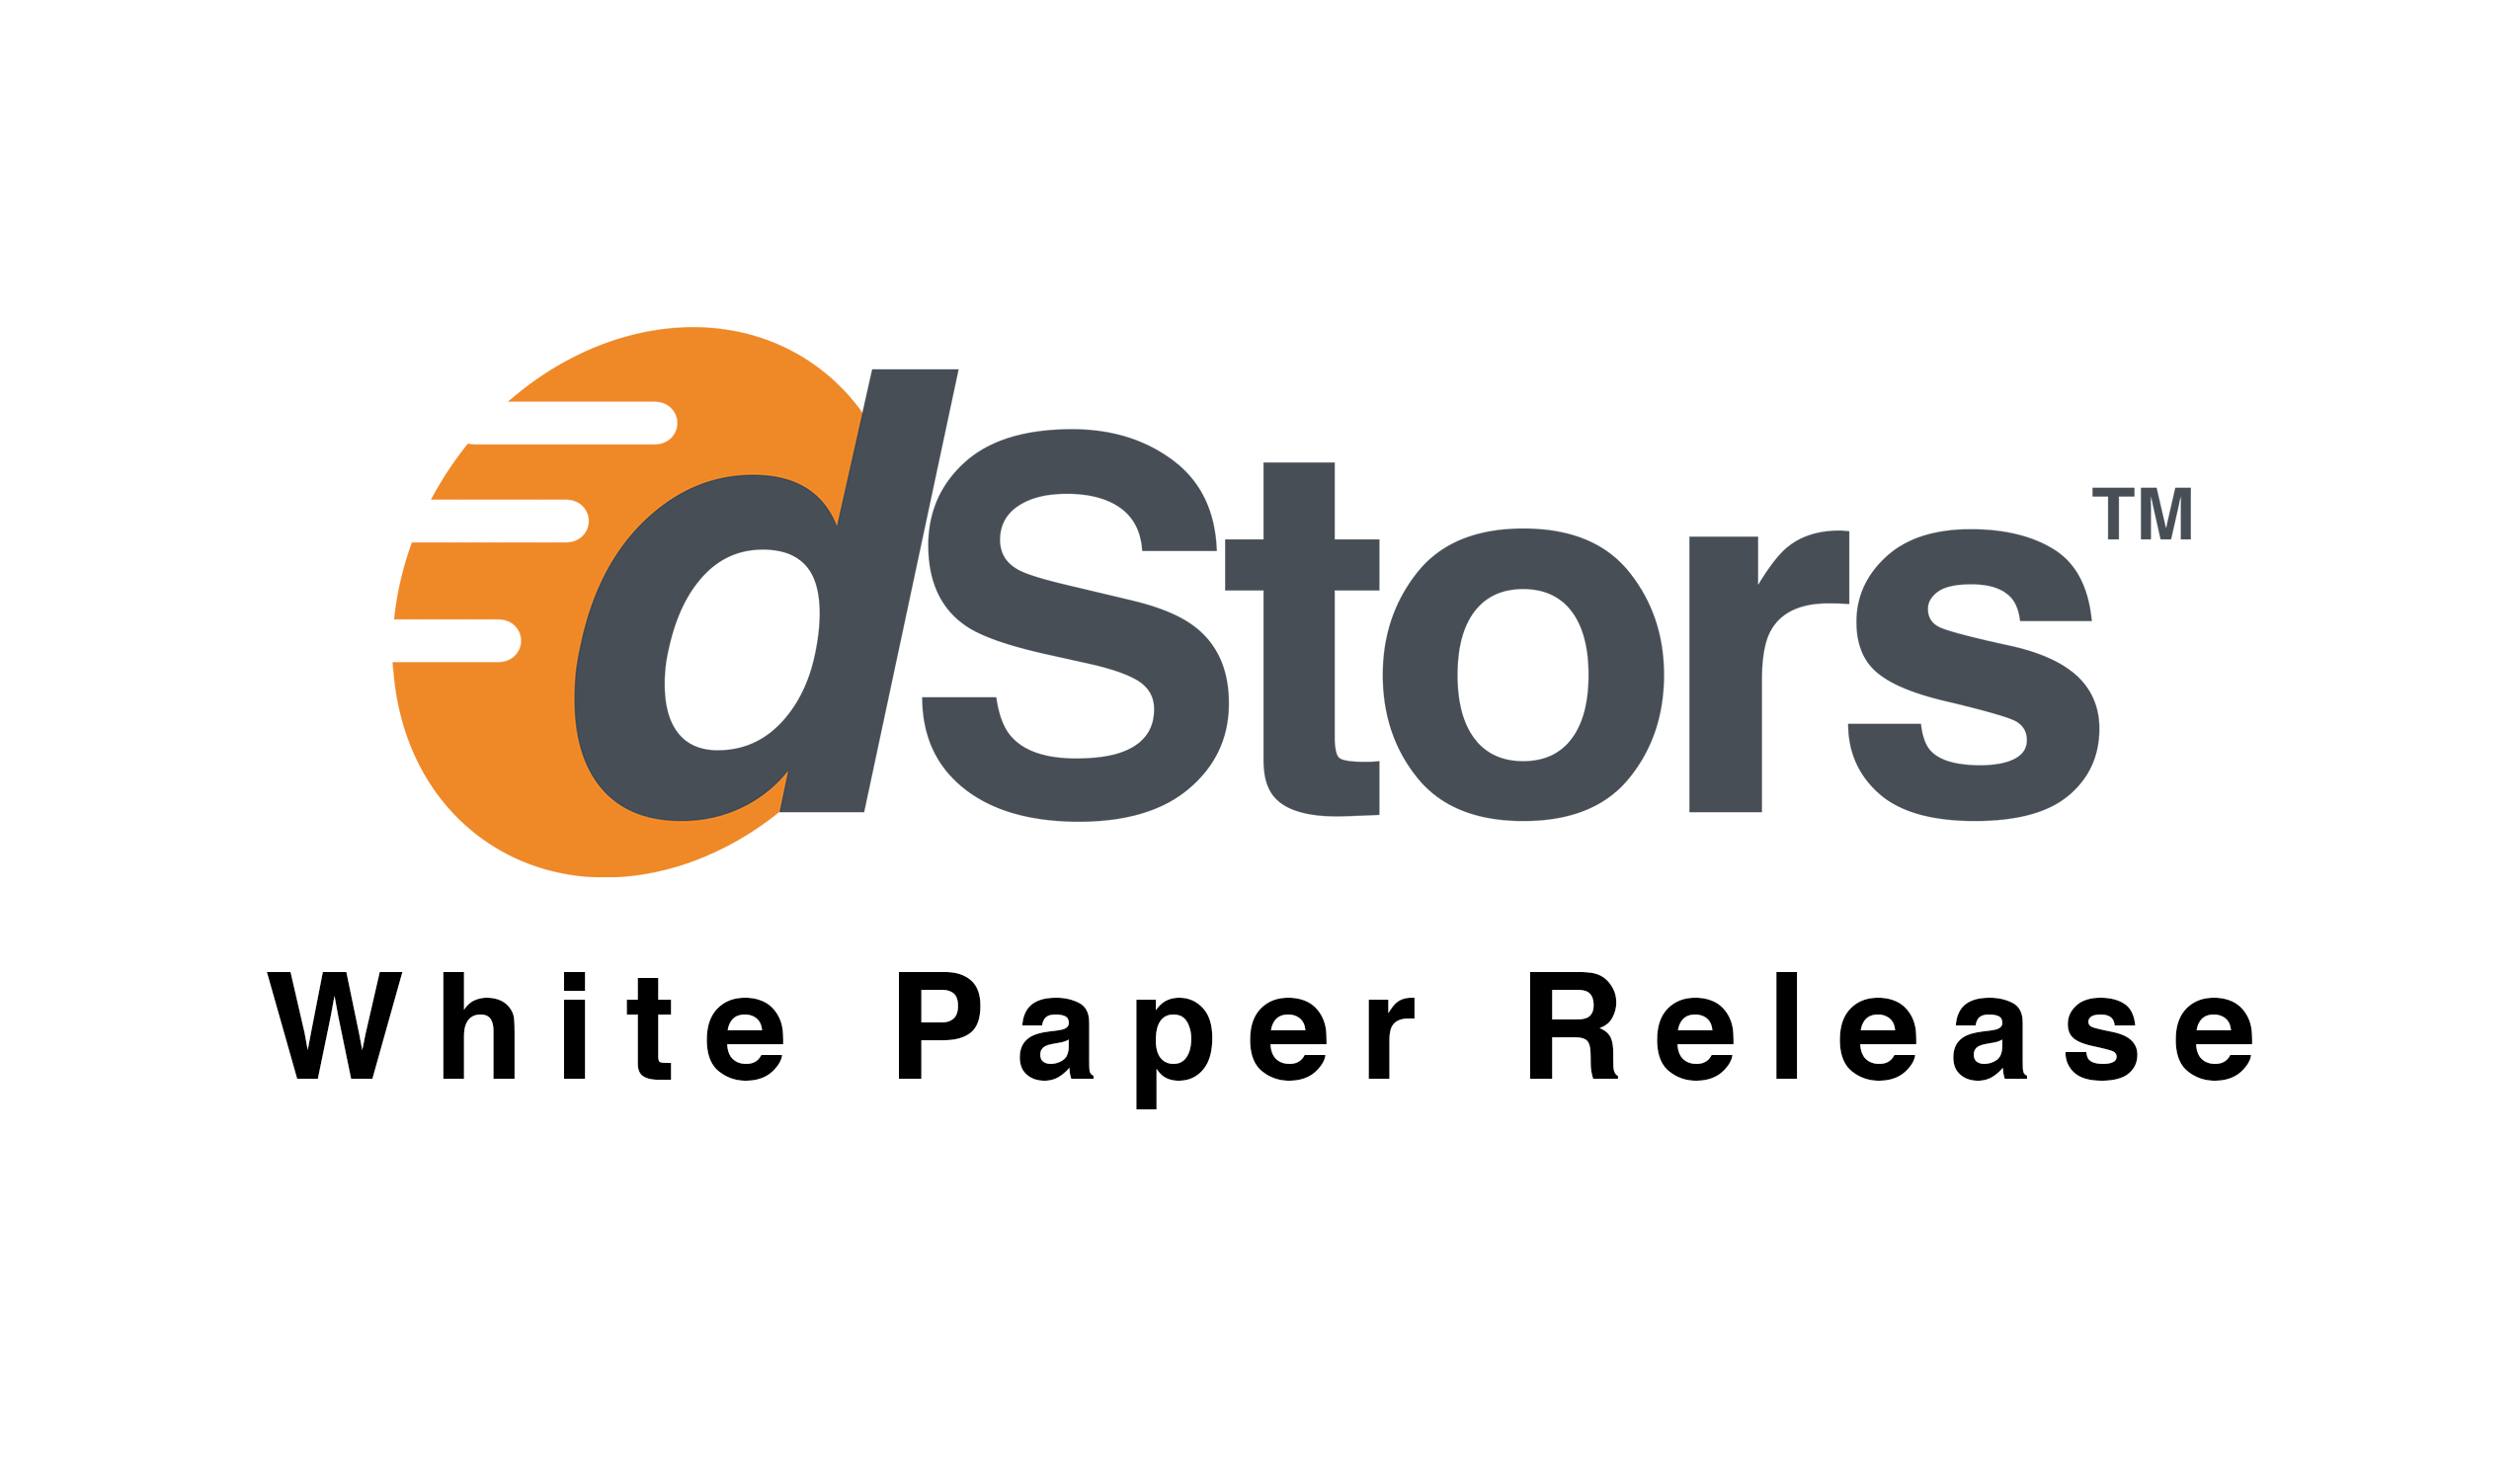 DSTORES whitepaper cover.png